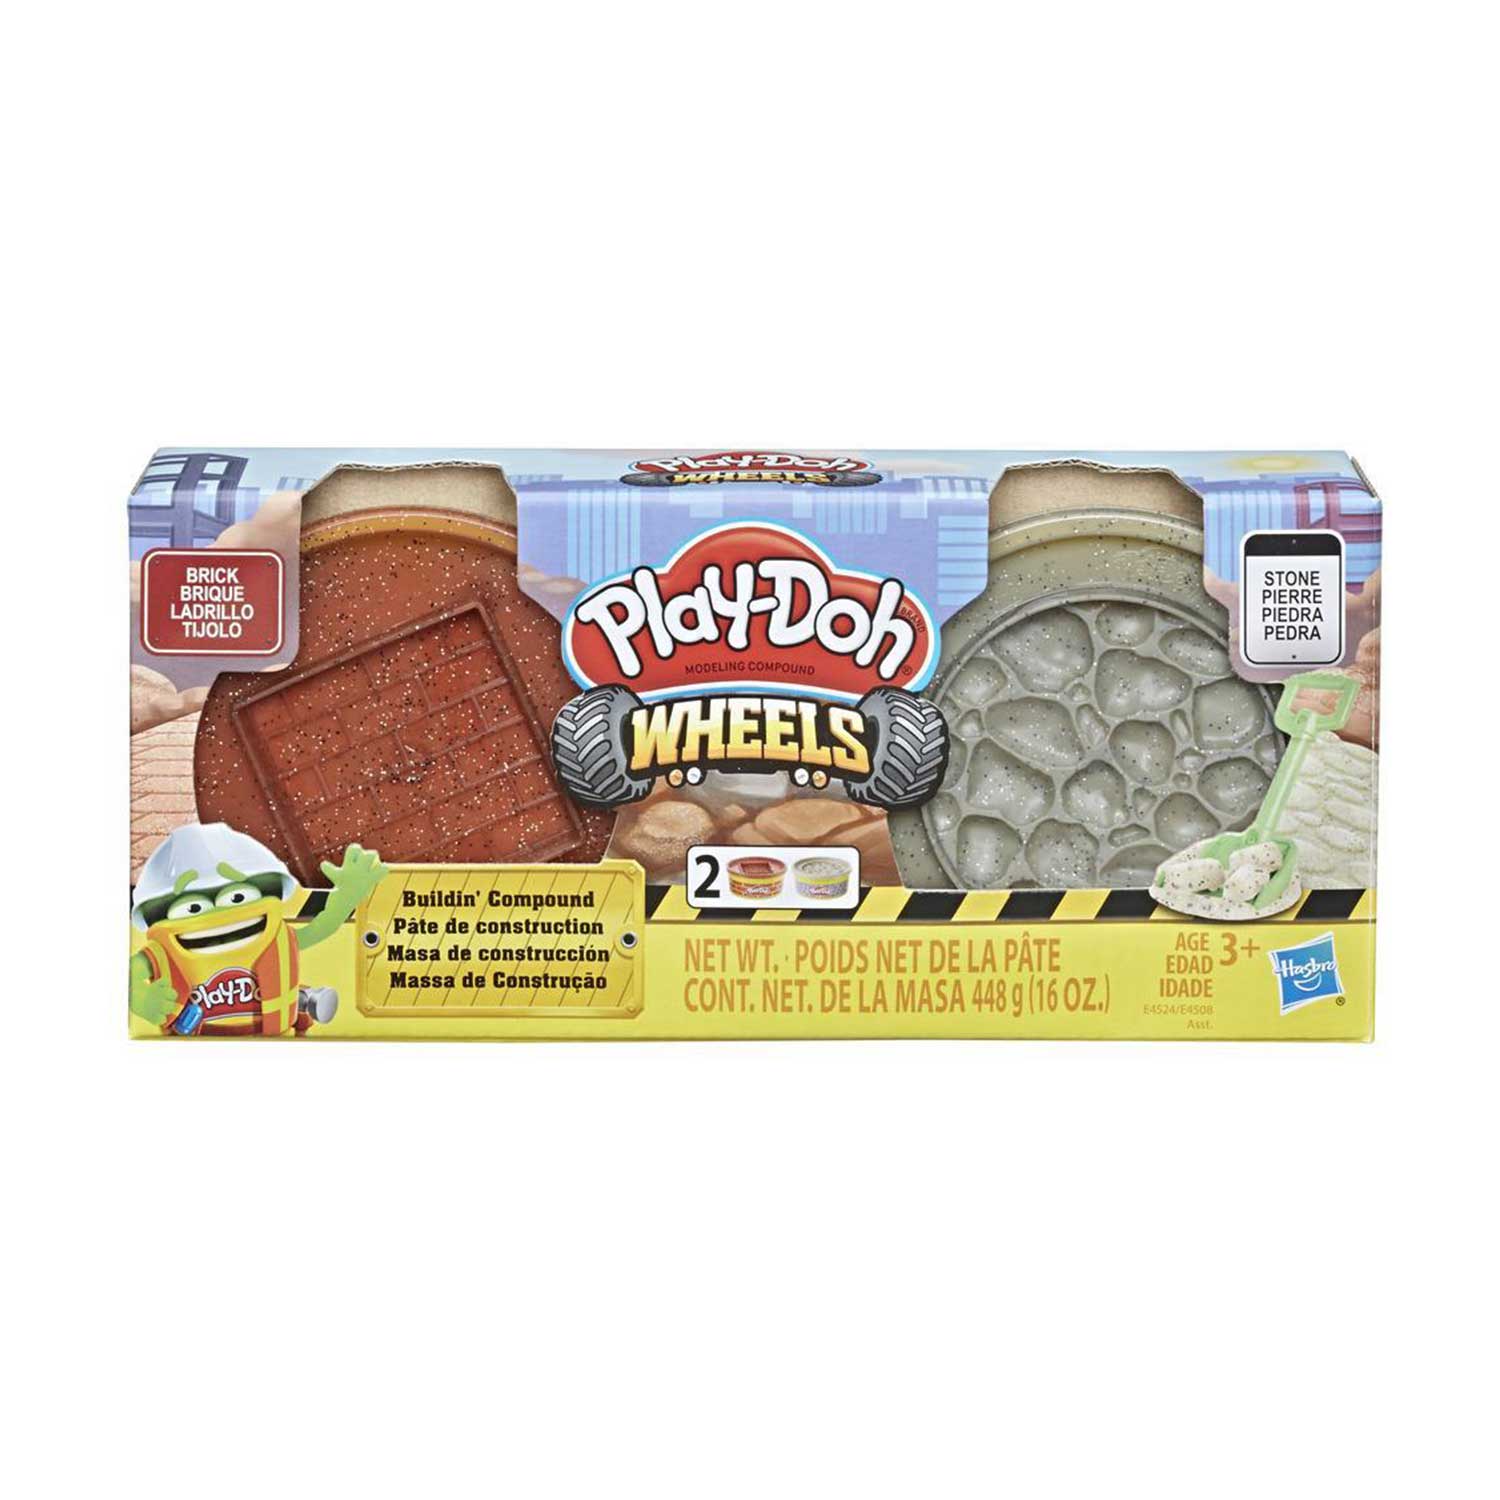 Play-Doh Wheels Brick and Stone Buildin' Compound 2-Pack of 8-Ounce Cans - Mod: HSBE4524EU4